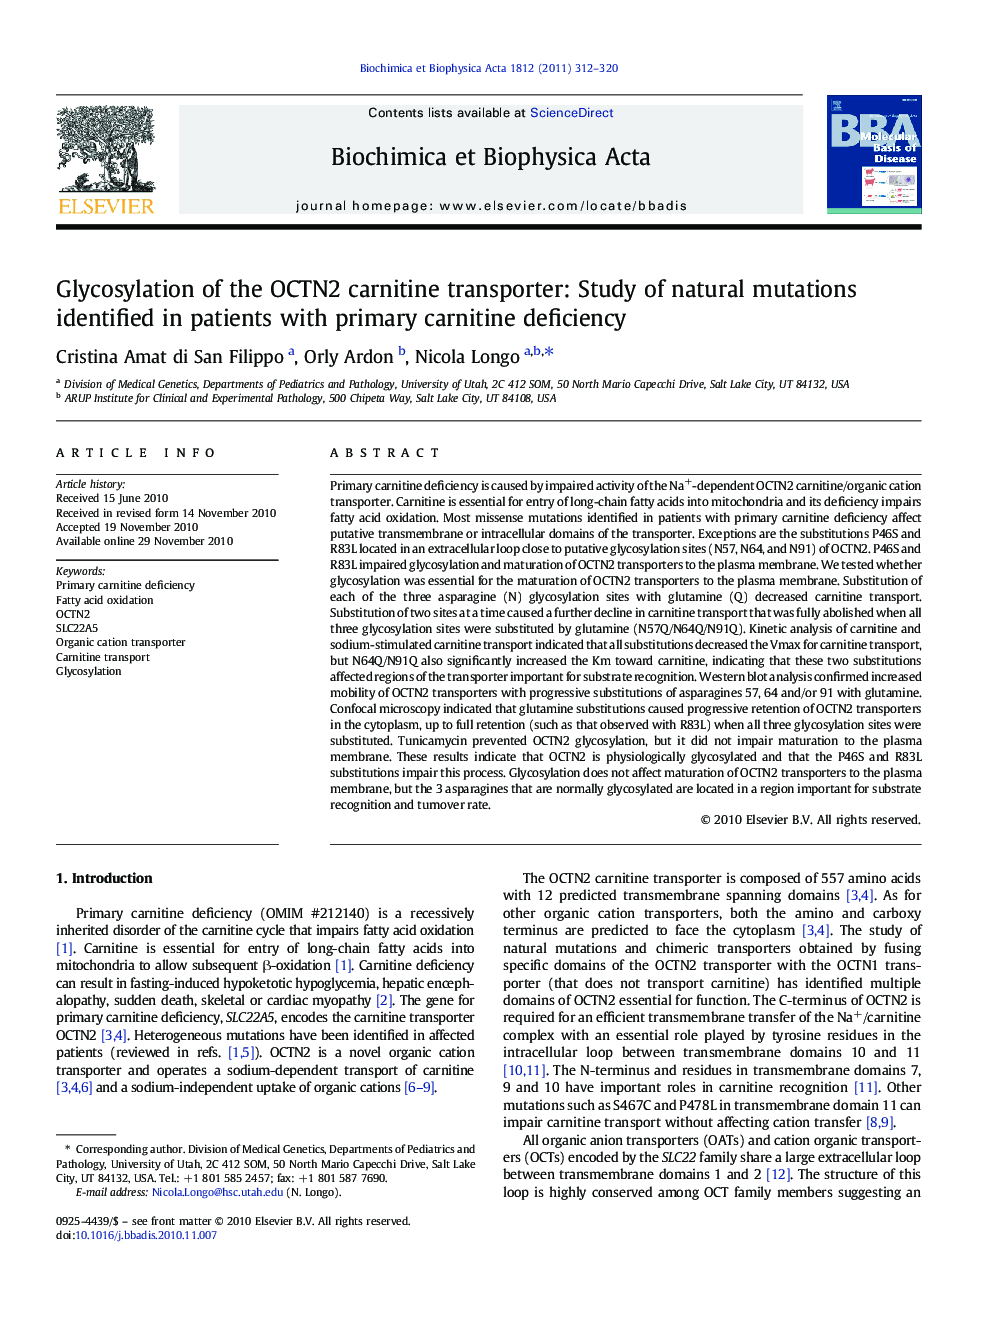 Glycosylation of the OCTN2 carnitine transporter: Study of natural mutations identified in patients with primary carnitine deficiency